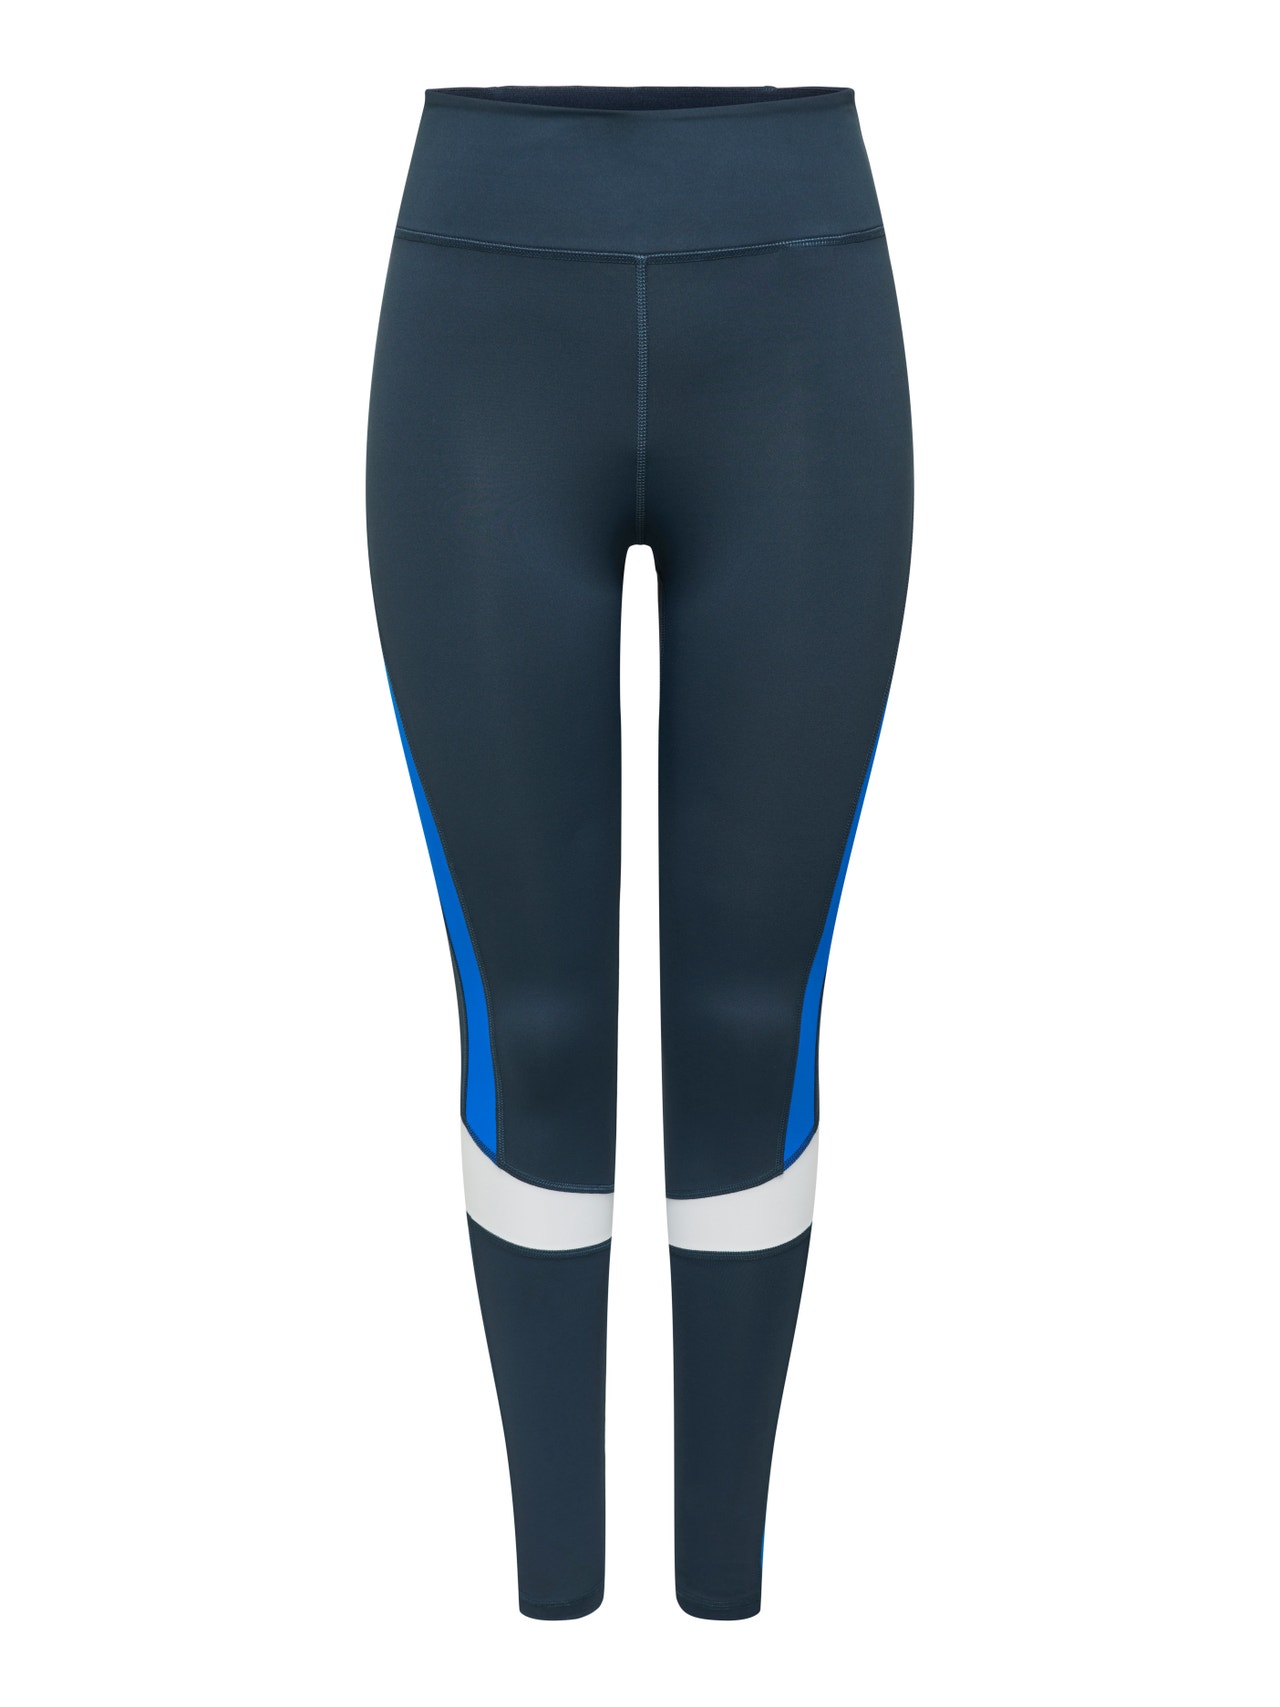 ONLY Leggings Tight Fit Taille haute -Blue Nights - 15281006